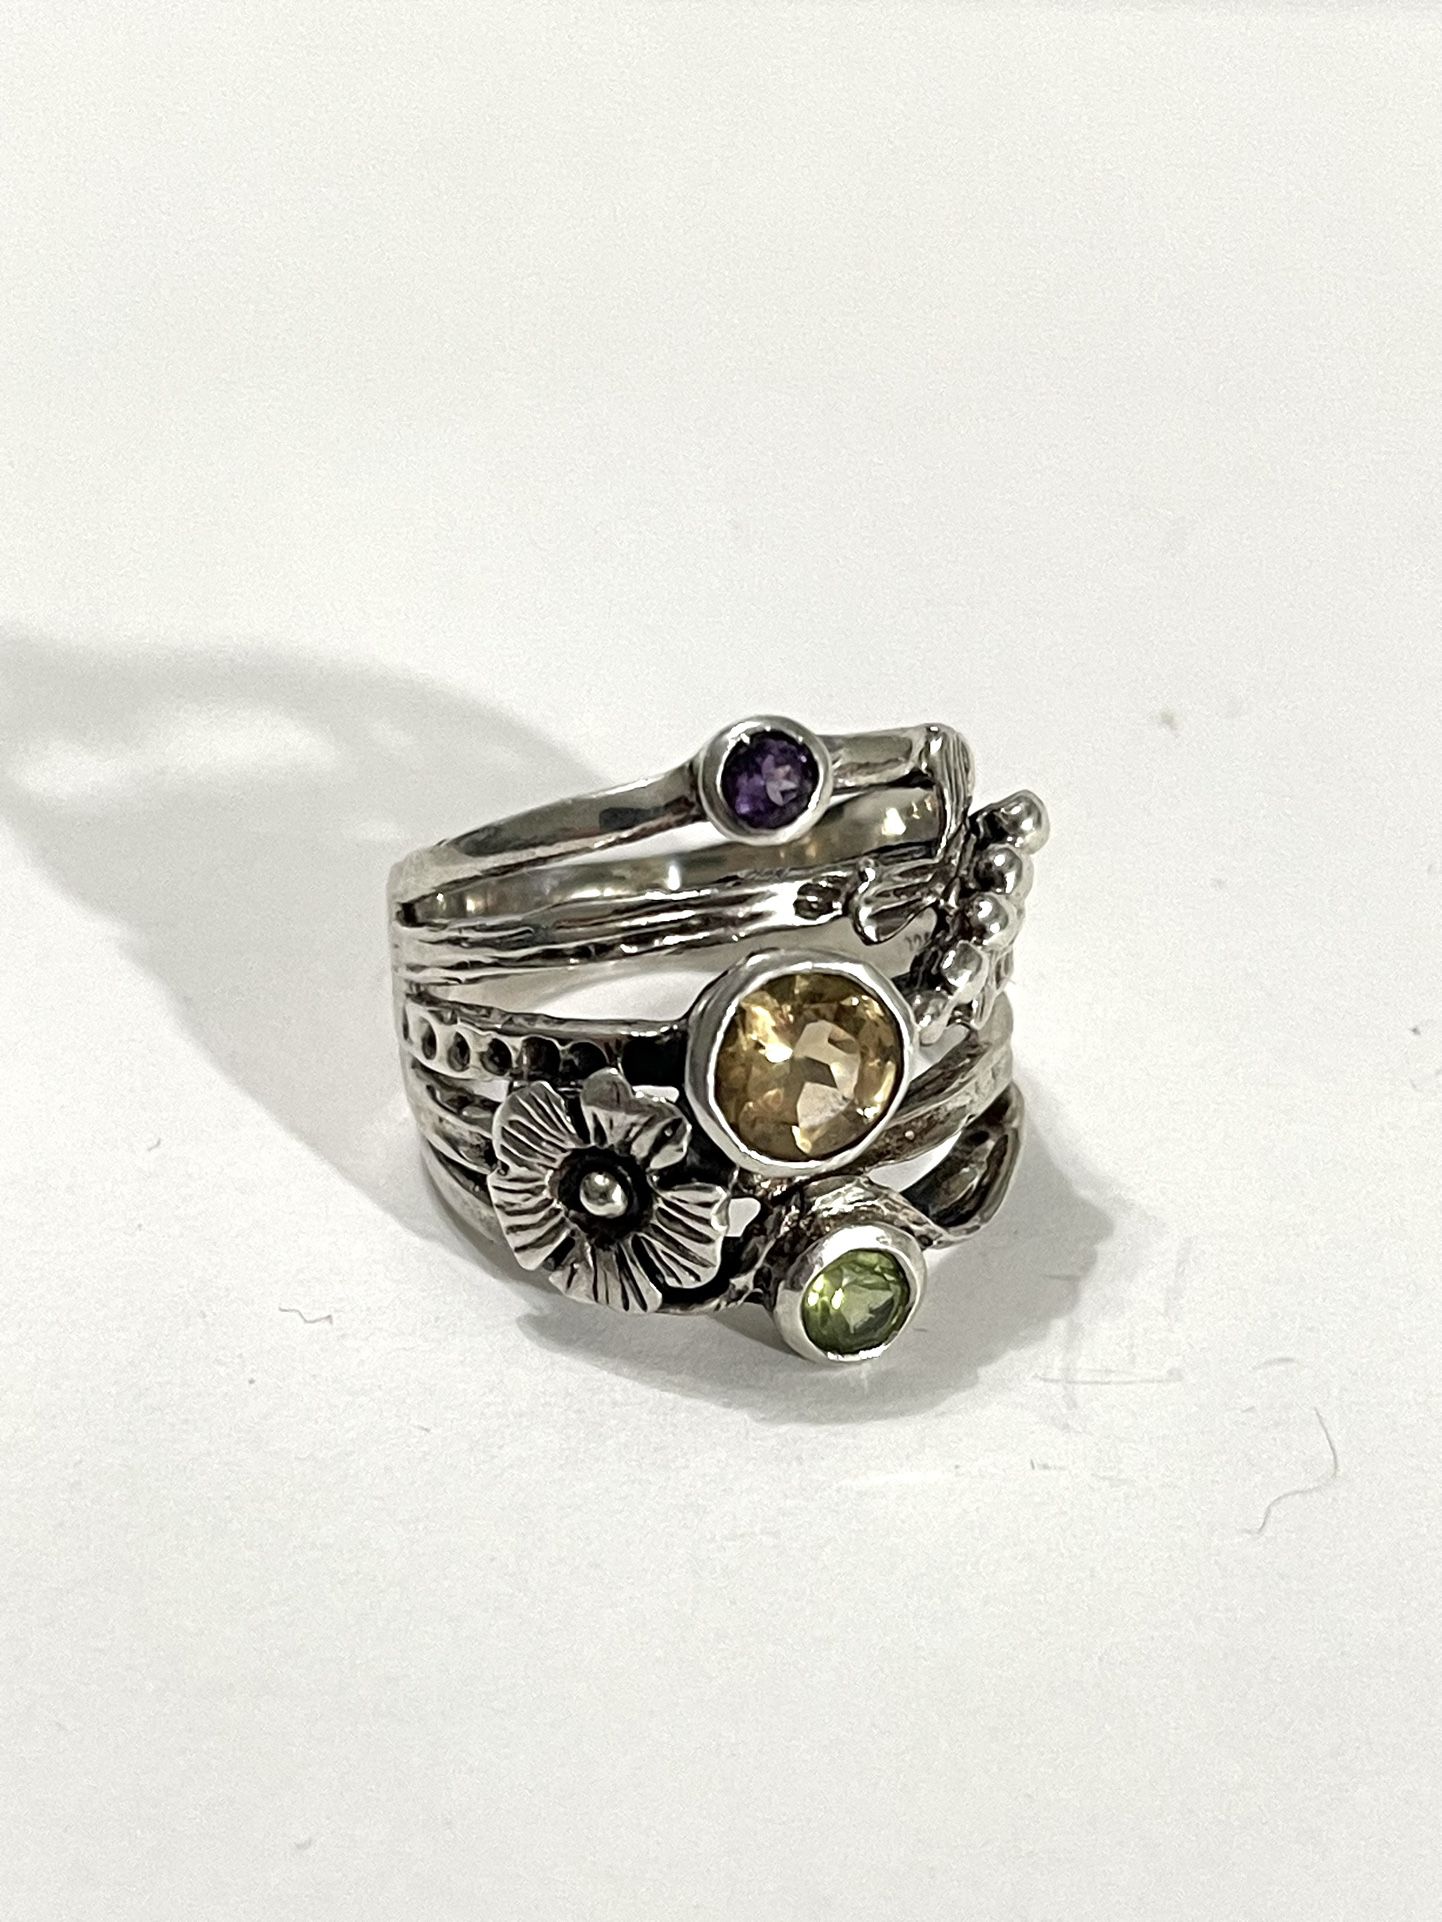 Vintage Great Condition sterling silver ring with  gemstones silver ring from India. Size 7.5 